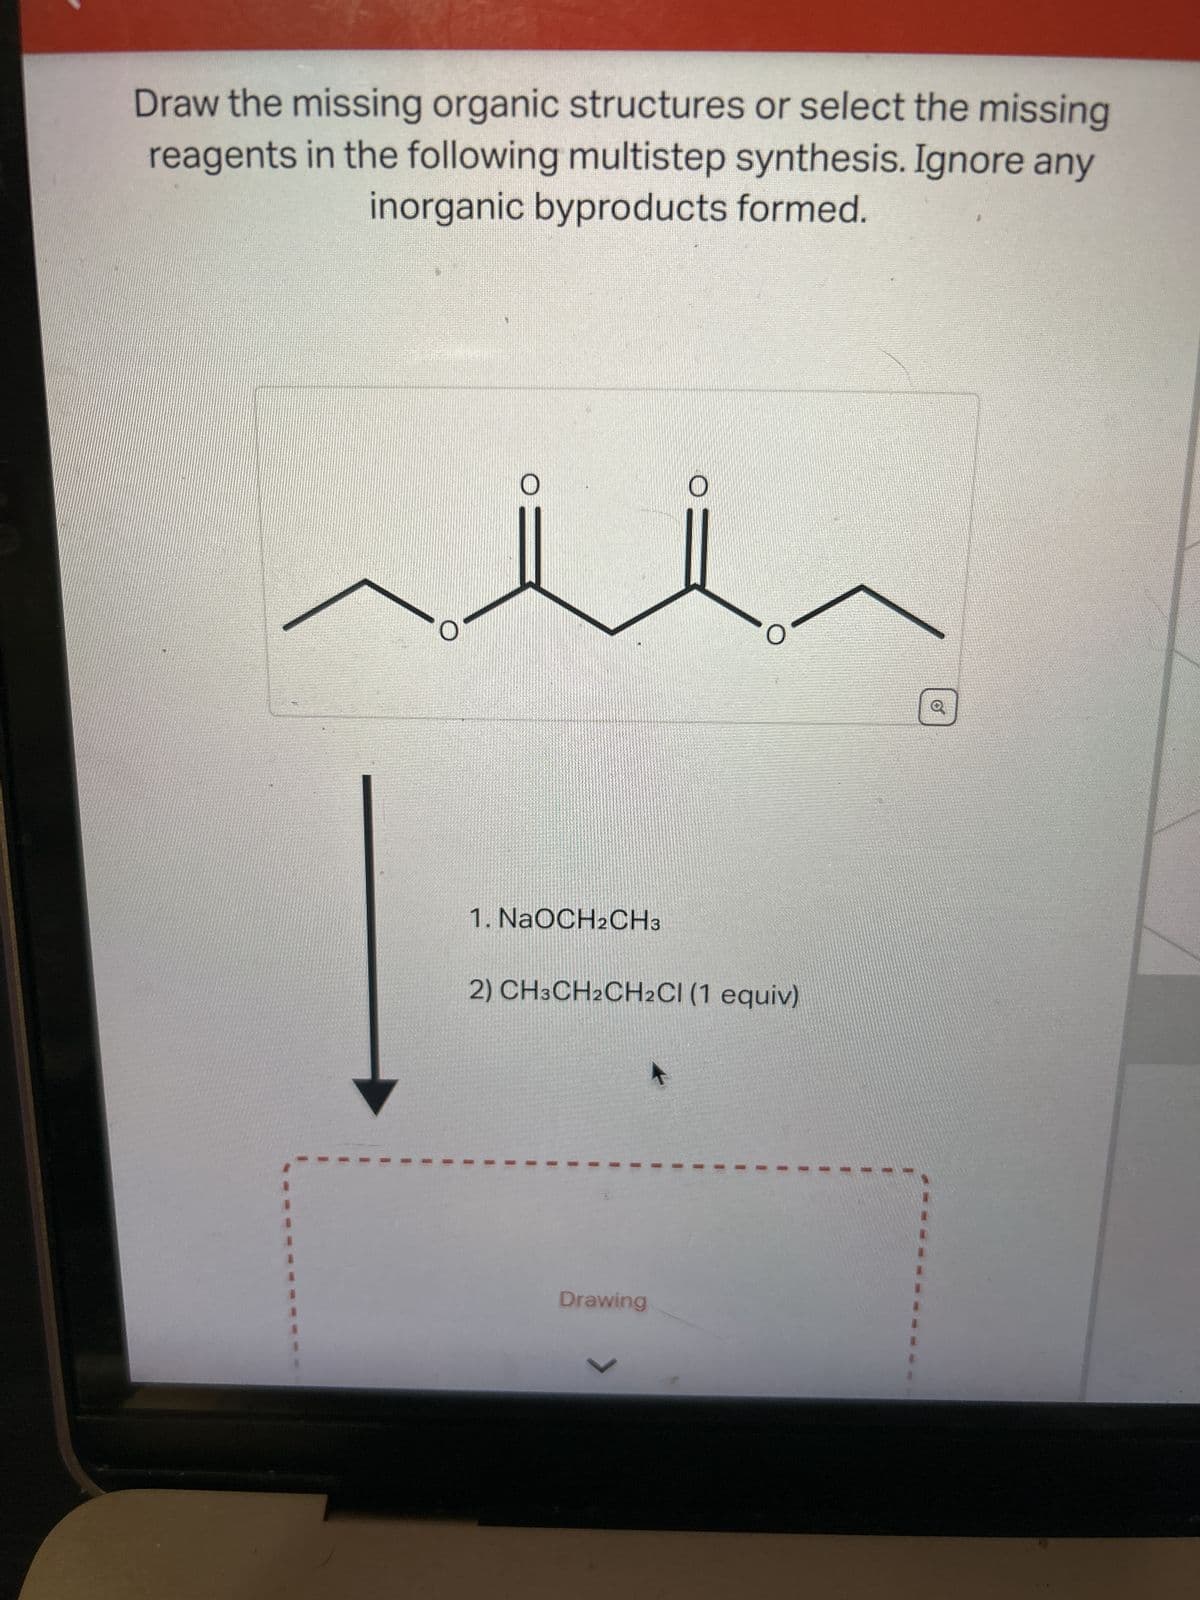 Draw the missing organic structures or select the missing
reagents in the following multistep synthesis. Ignore any
inorganic byproducts formed.
O
1. NaOCH2CH3
2) CH3CH2CH₂Cl (1 equiv)
Drawing
>
1
I
1